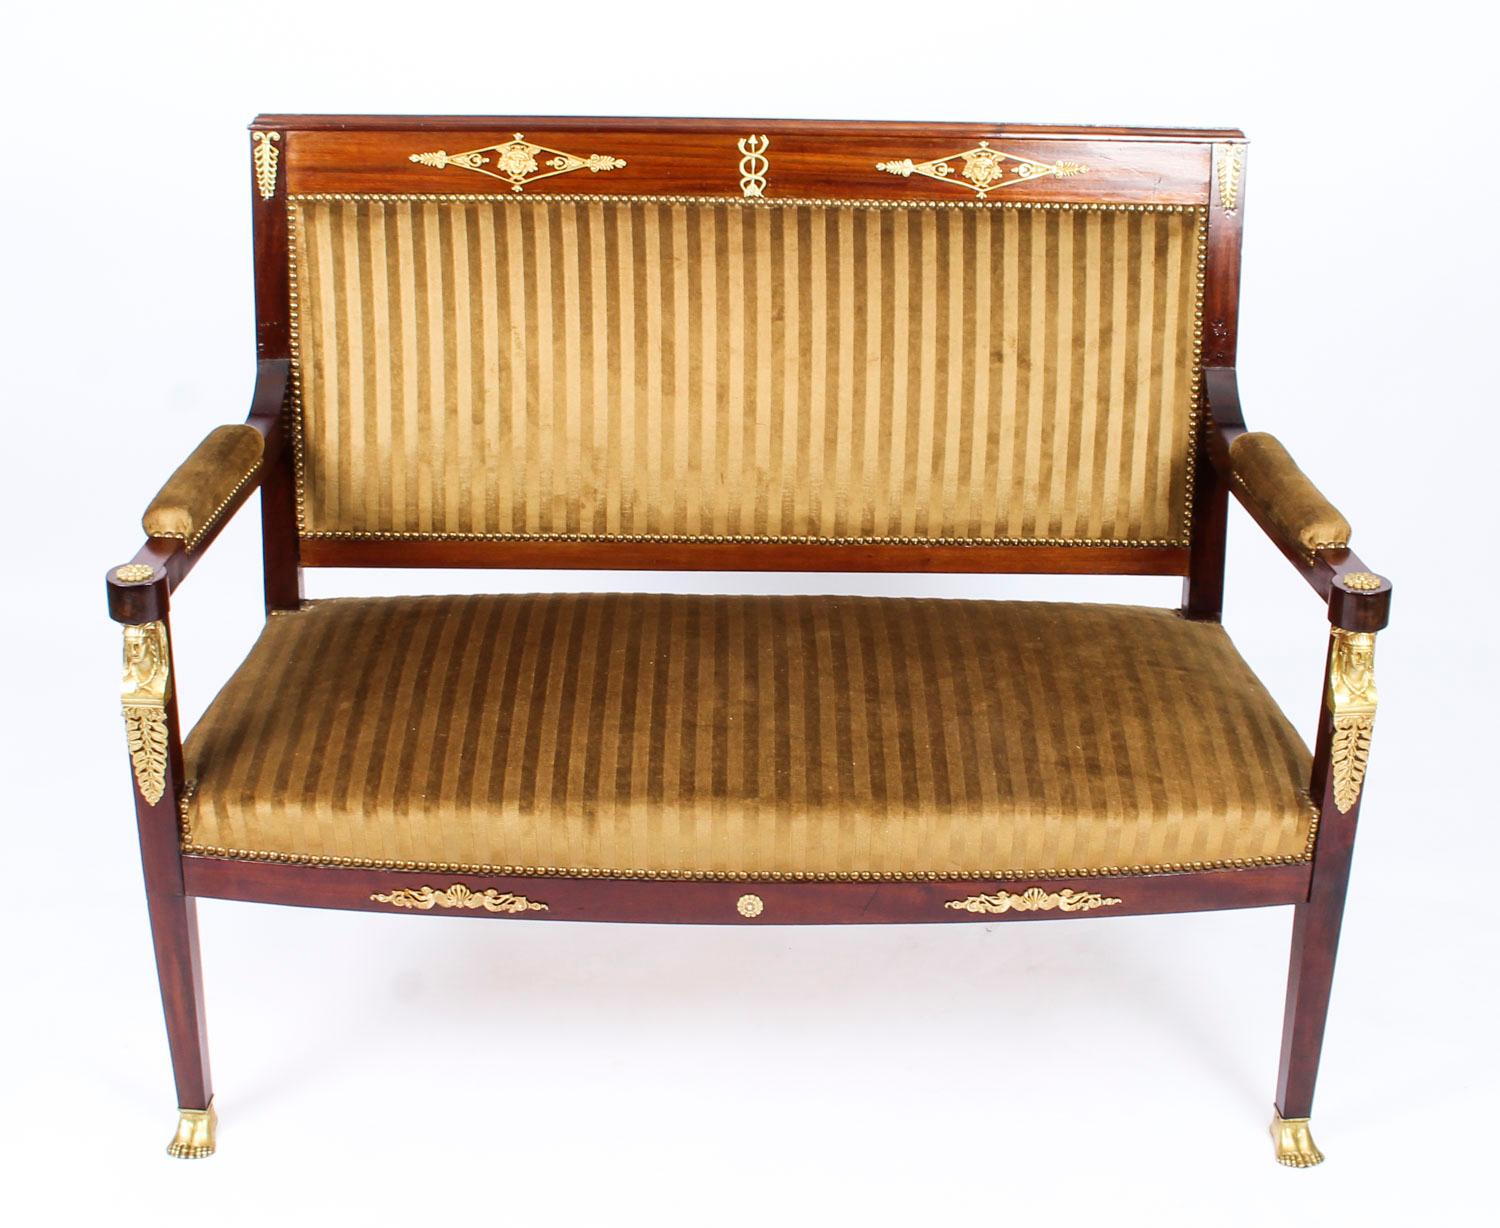 This is a fantastic and highly decorative antique French gilt bronze mounted Empire Revival sofa, circa 1880 in date.

Crafted from fabulous solid mahogany and smothered in fabulous high quality ormolu mounts reminiscent of the Empire style with